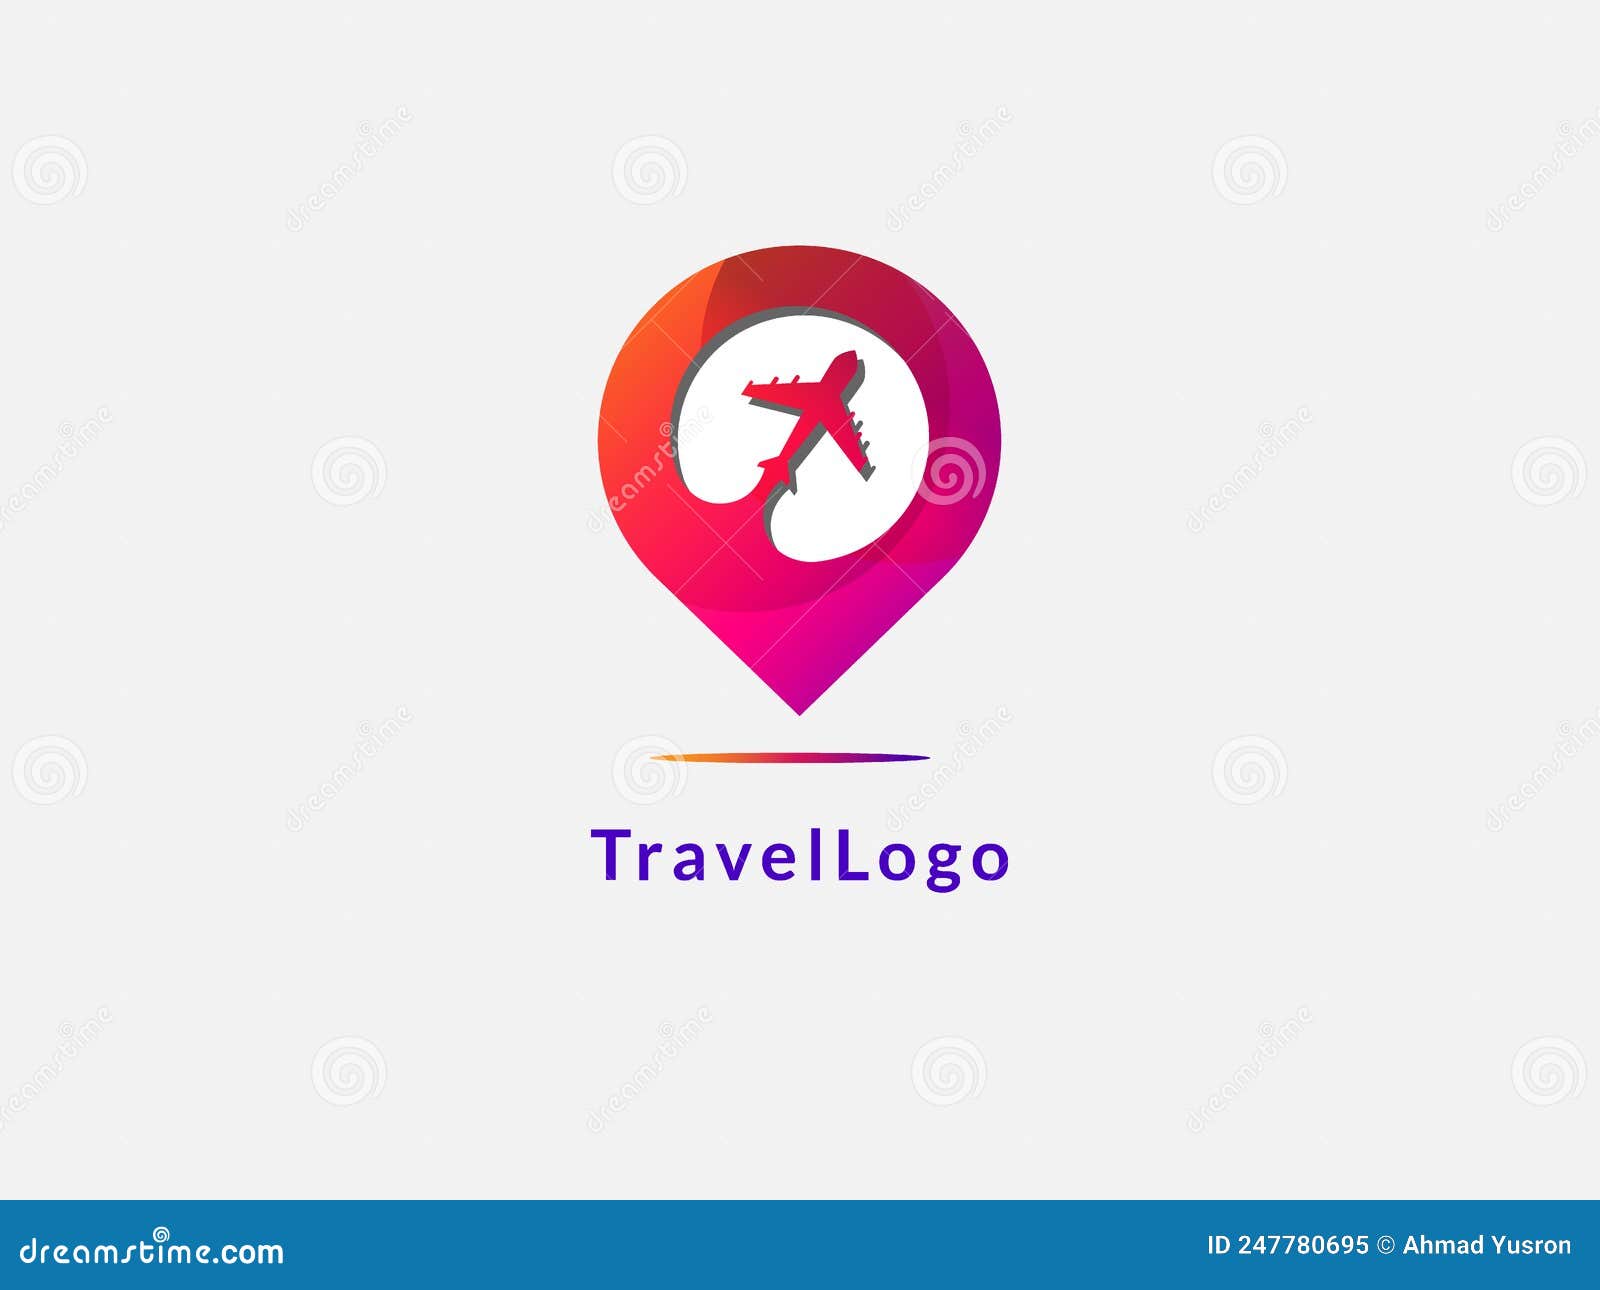 Transportation and Traveling Agency Vector Logo Design with Letter G ...